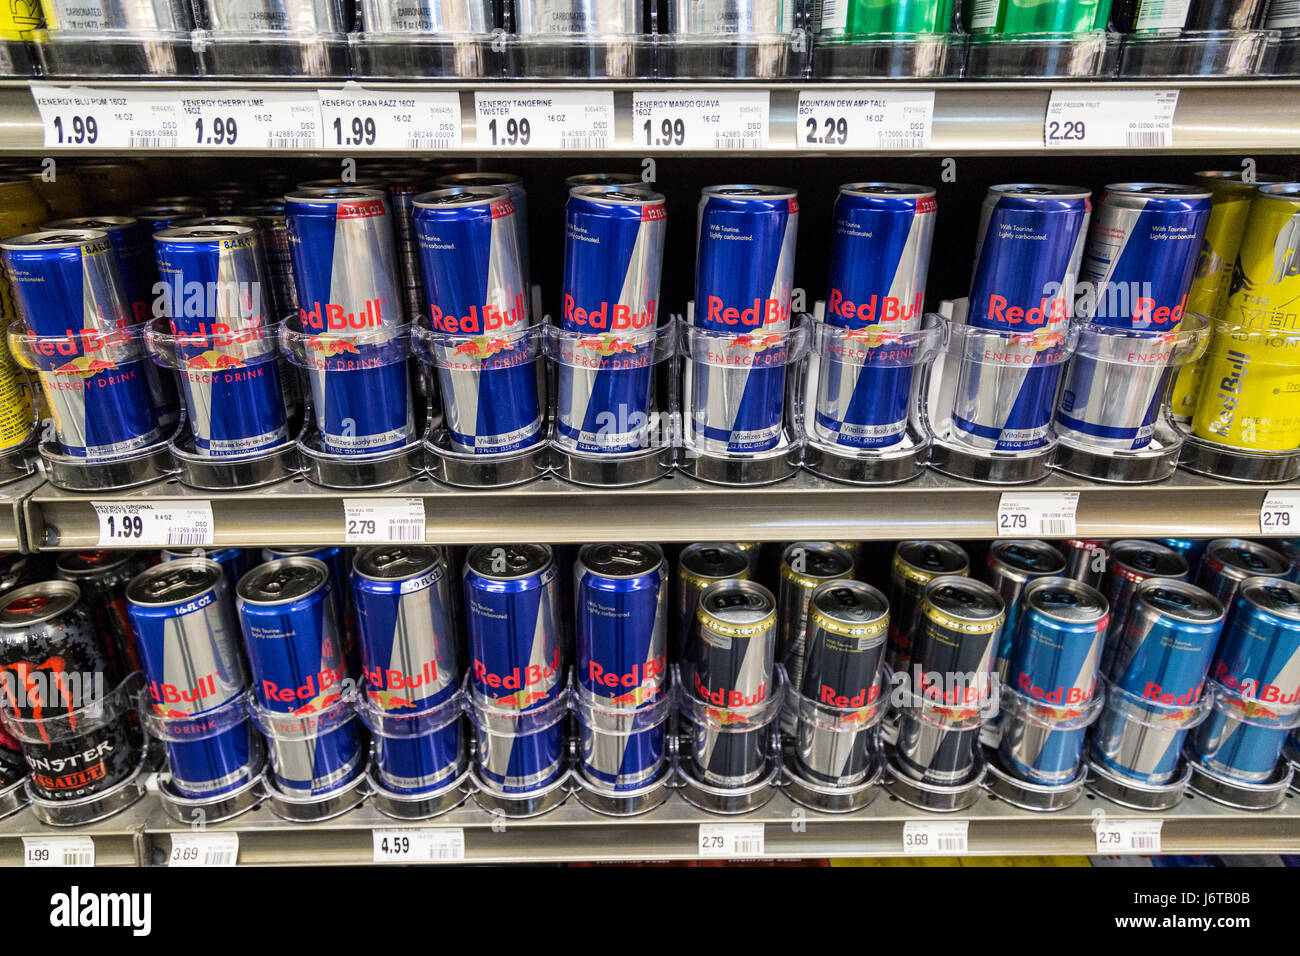 Cans of Red Bull Energy drink on the shelves of a grocery store Stock Photo  - Alamy